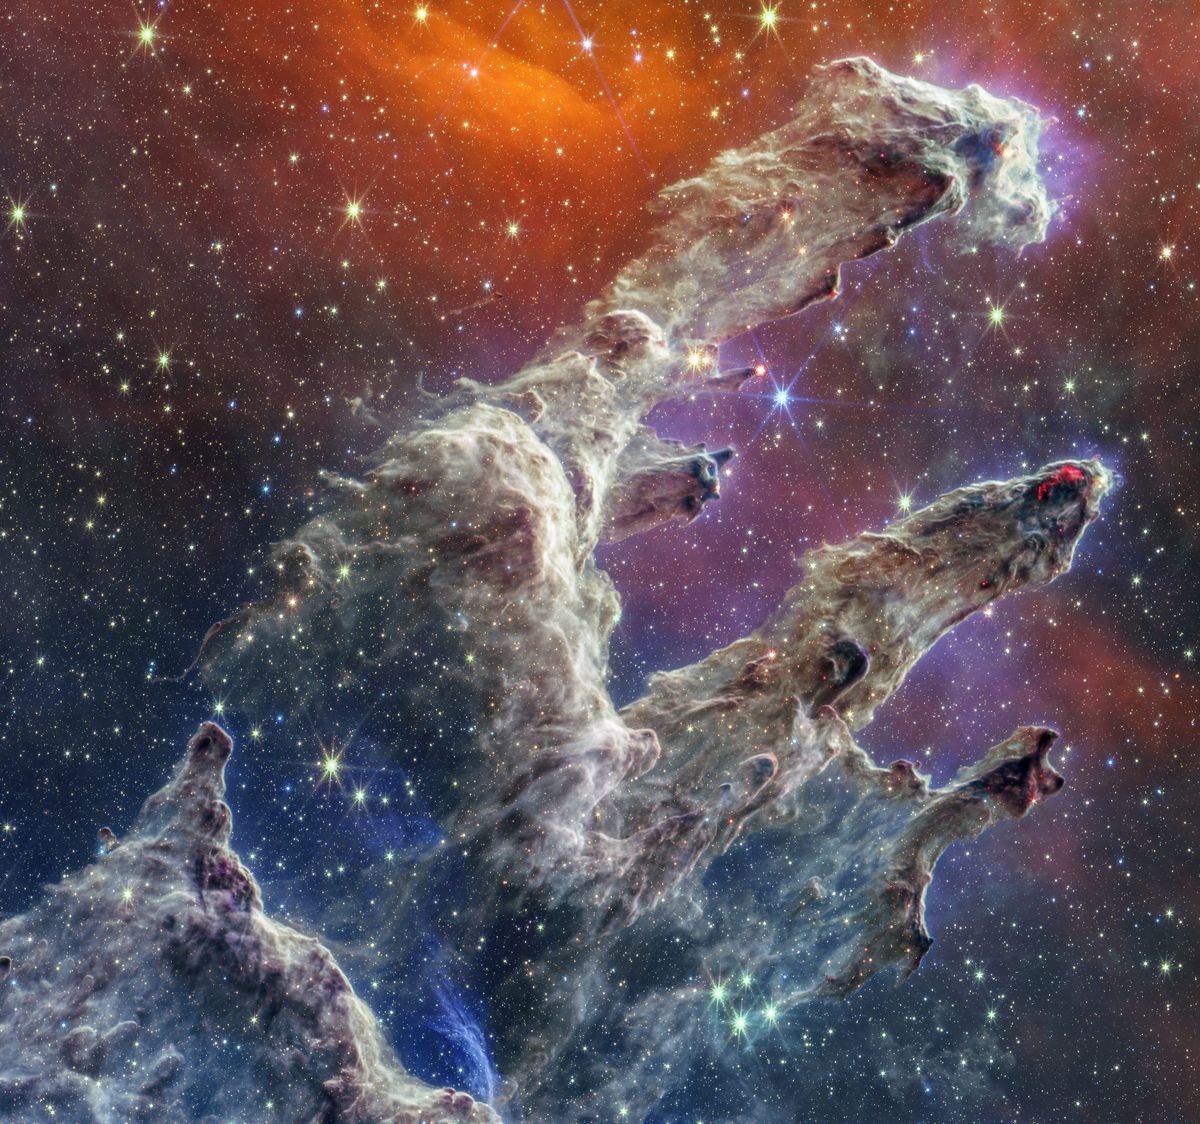 A composite of the Pillars of Creation taken by NASA’s James Webb Space Telescope